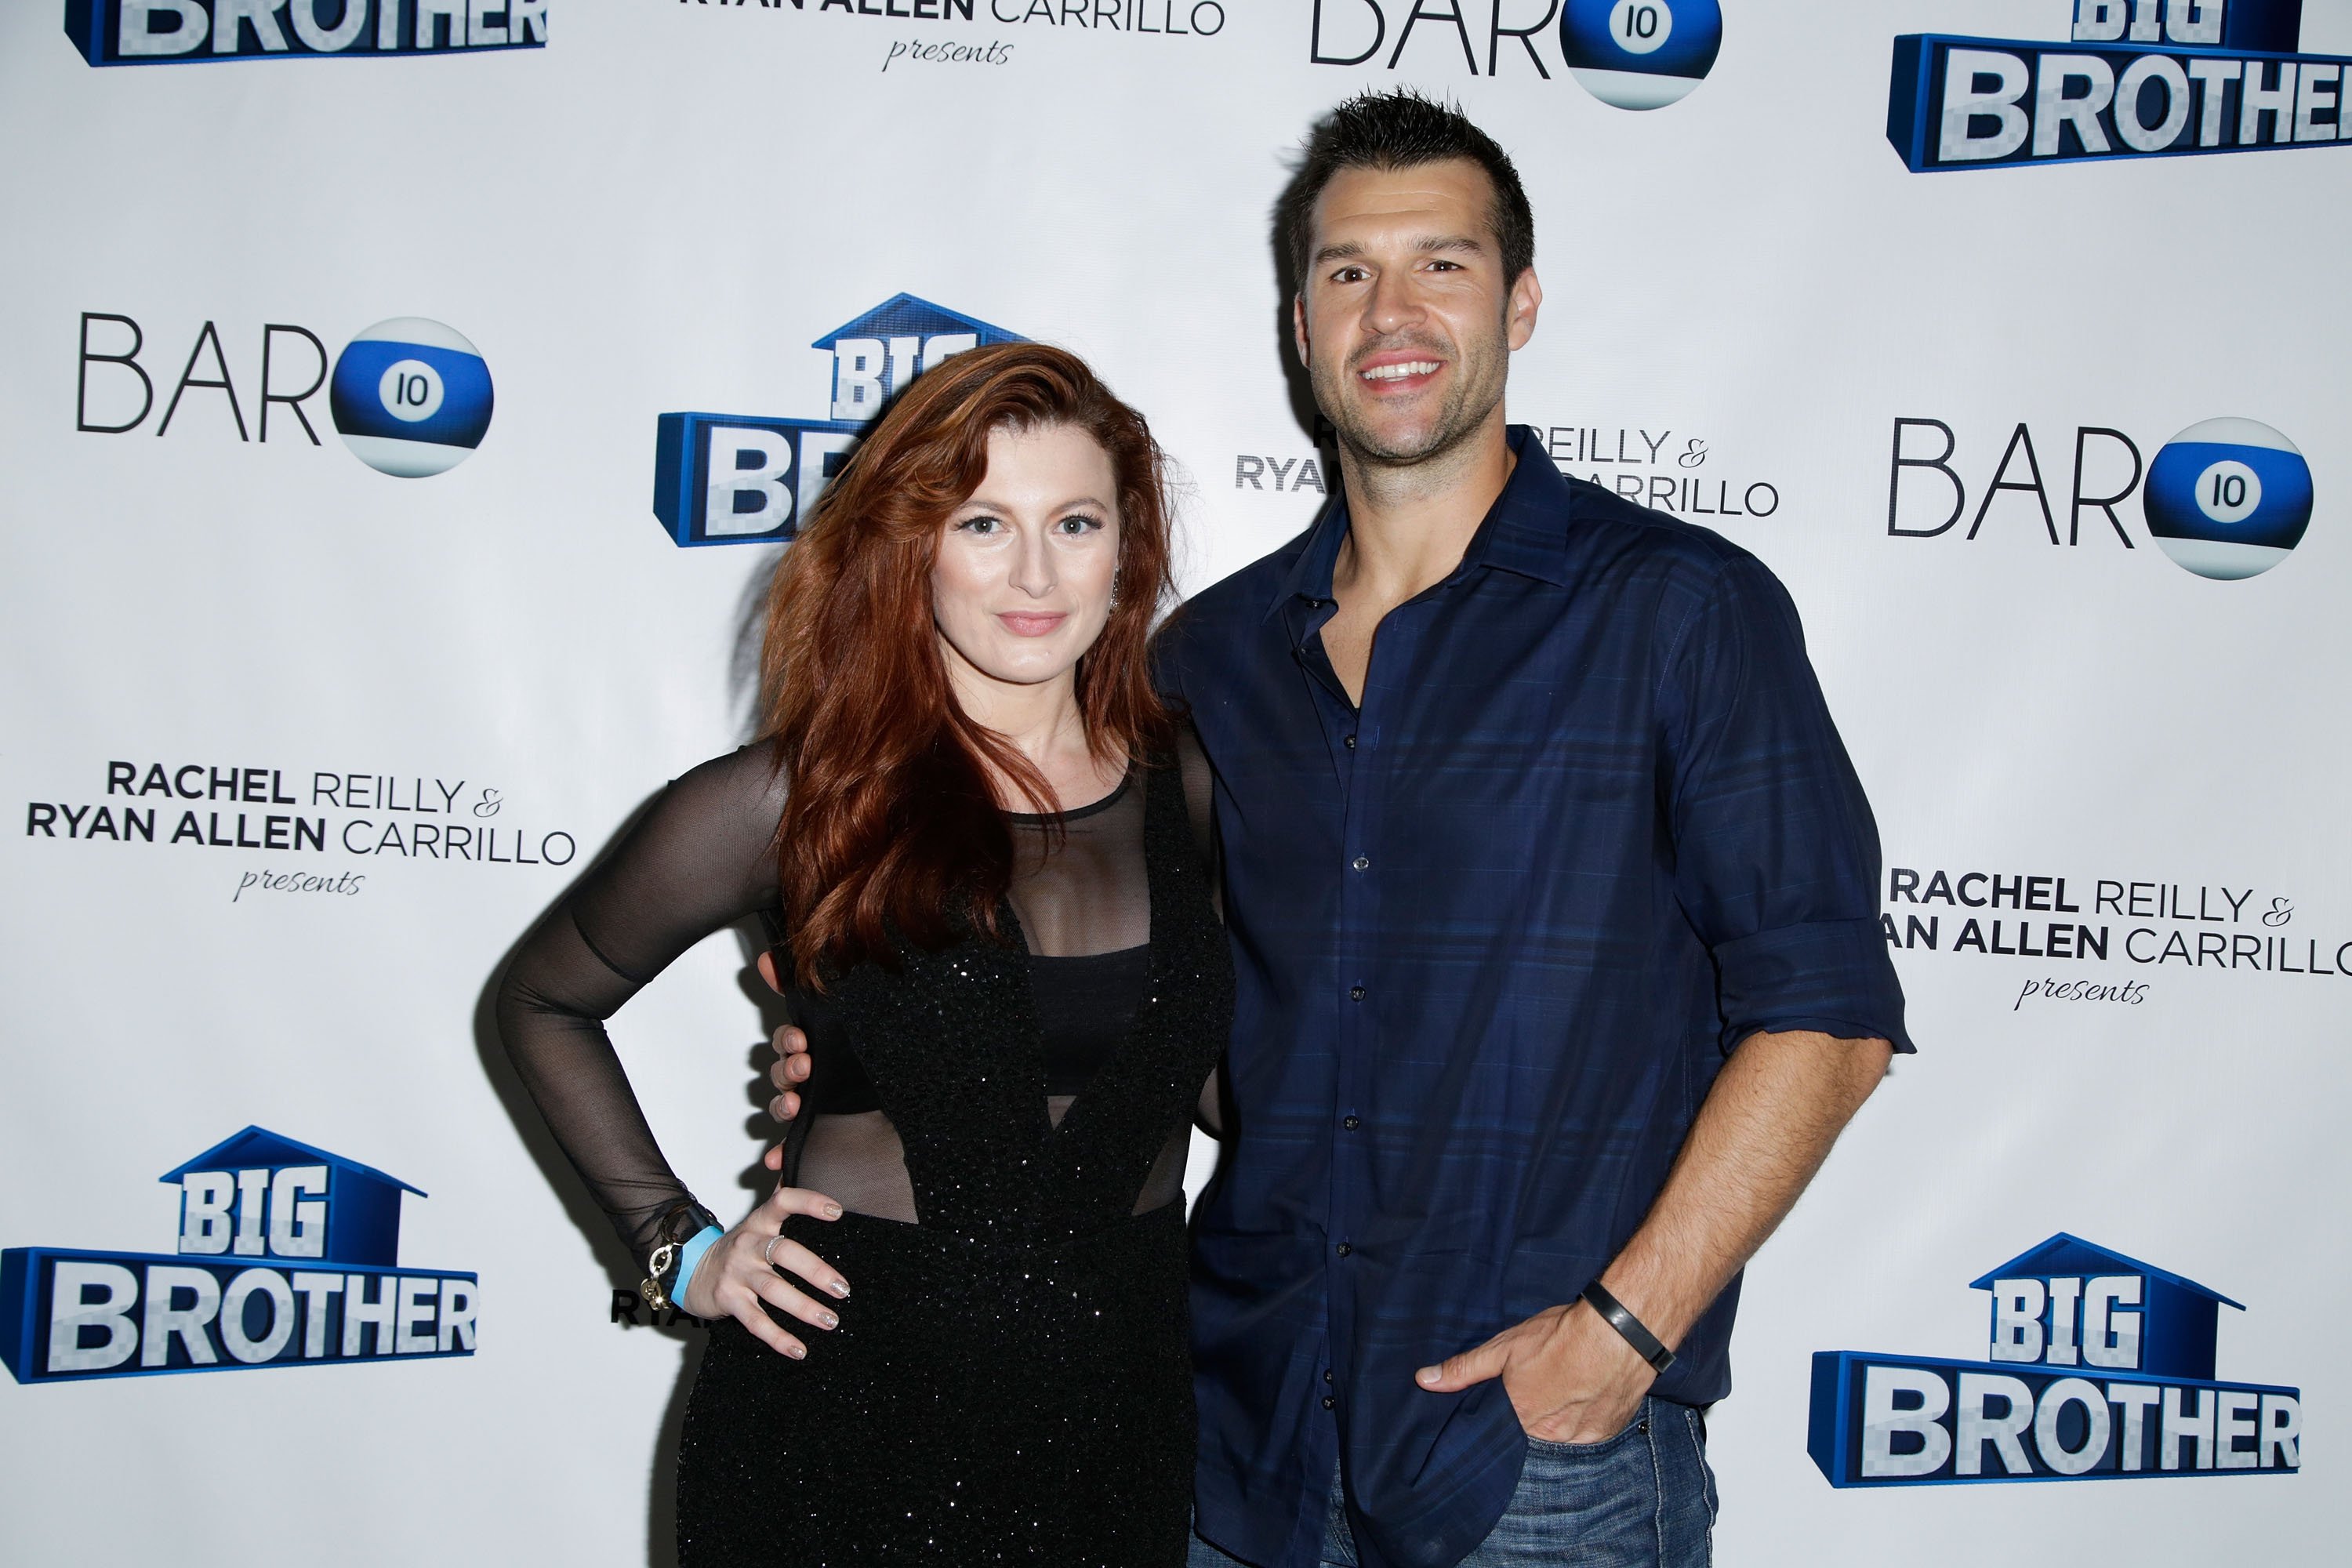 Rachel Reilly and Brendon Villegas, who were one of the famous 'Big Brother' showmances, pose for pictures together. Rachel wears a black dress. Brendon wears a dark blue button-up shirt and jeans.